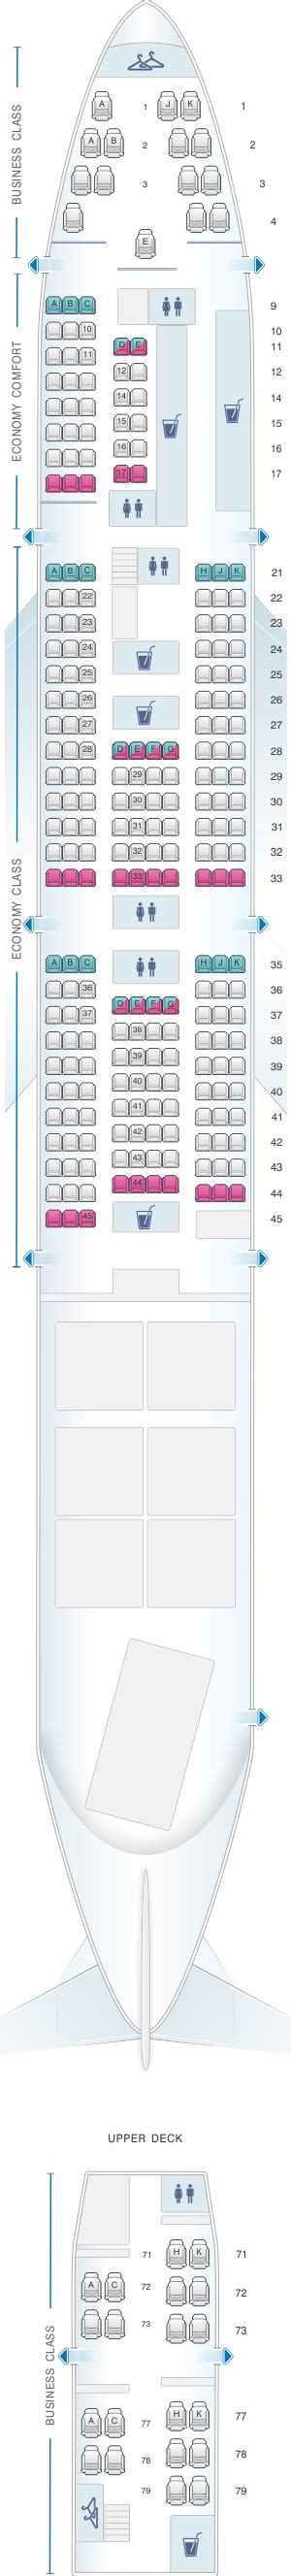 Seat Map Klm Boeing B747 400 Combi New World Business Class